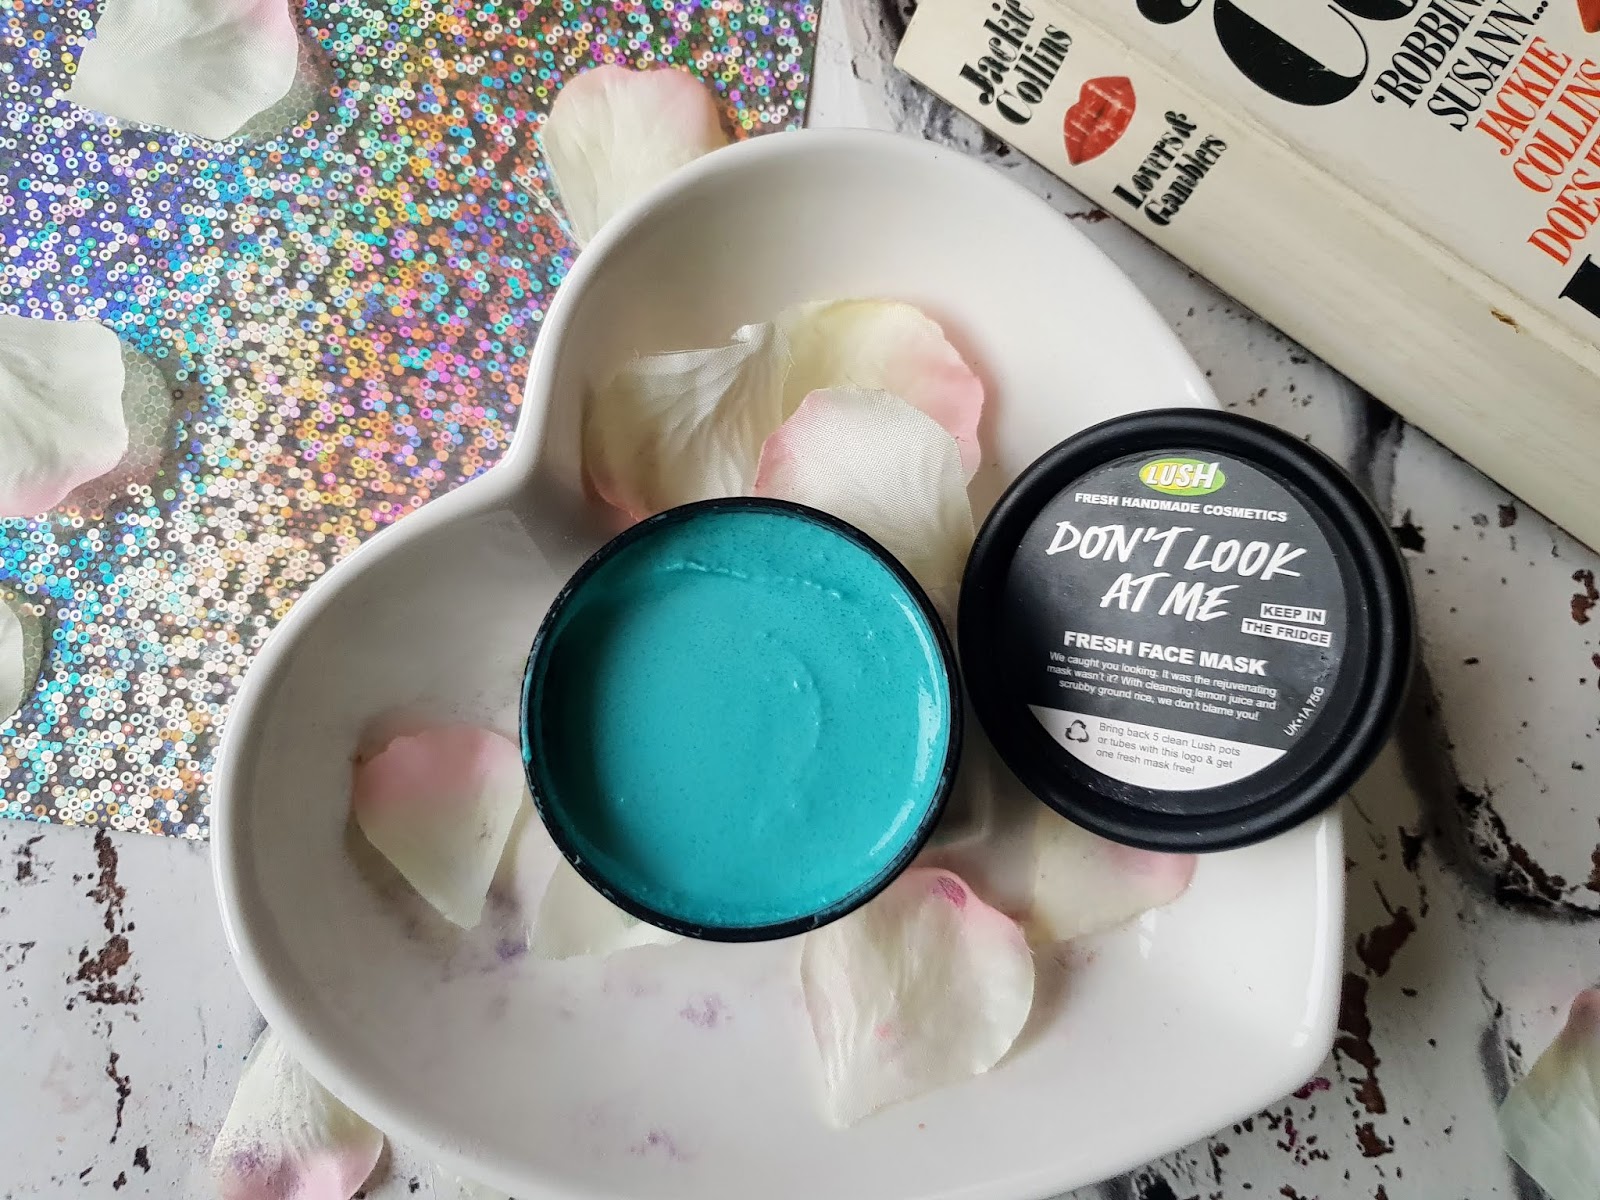 Lush Don't Look At Me  Fresh Face Mask | Review 